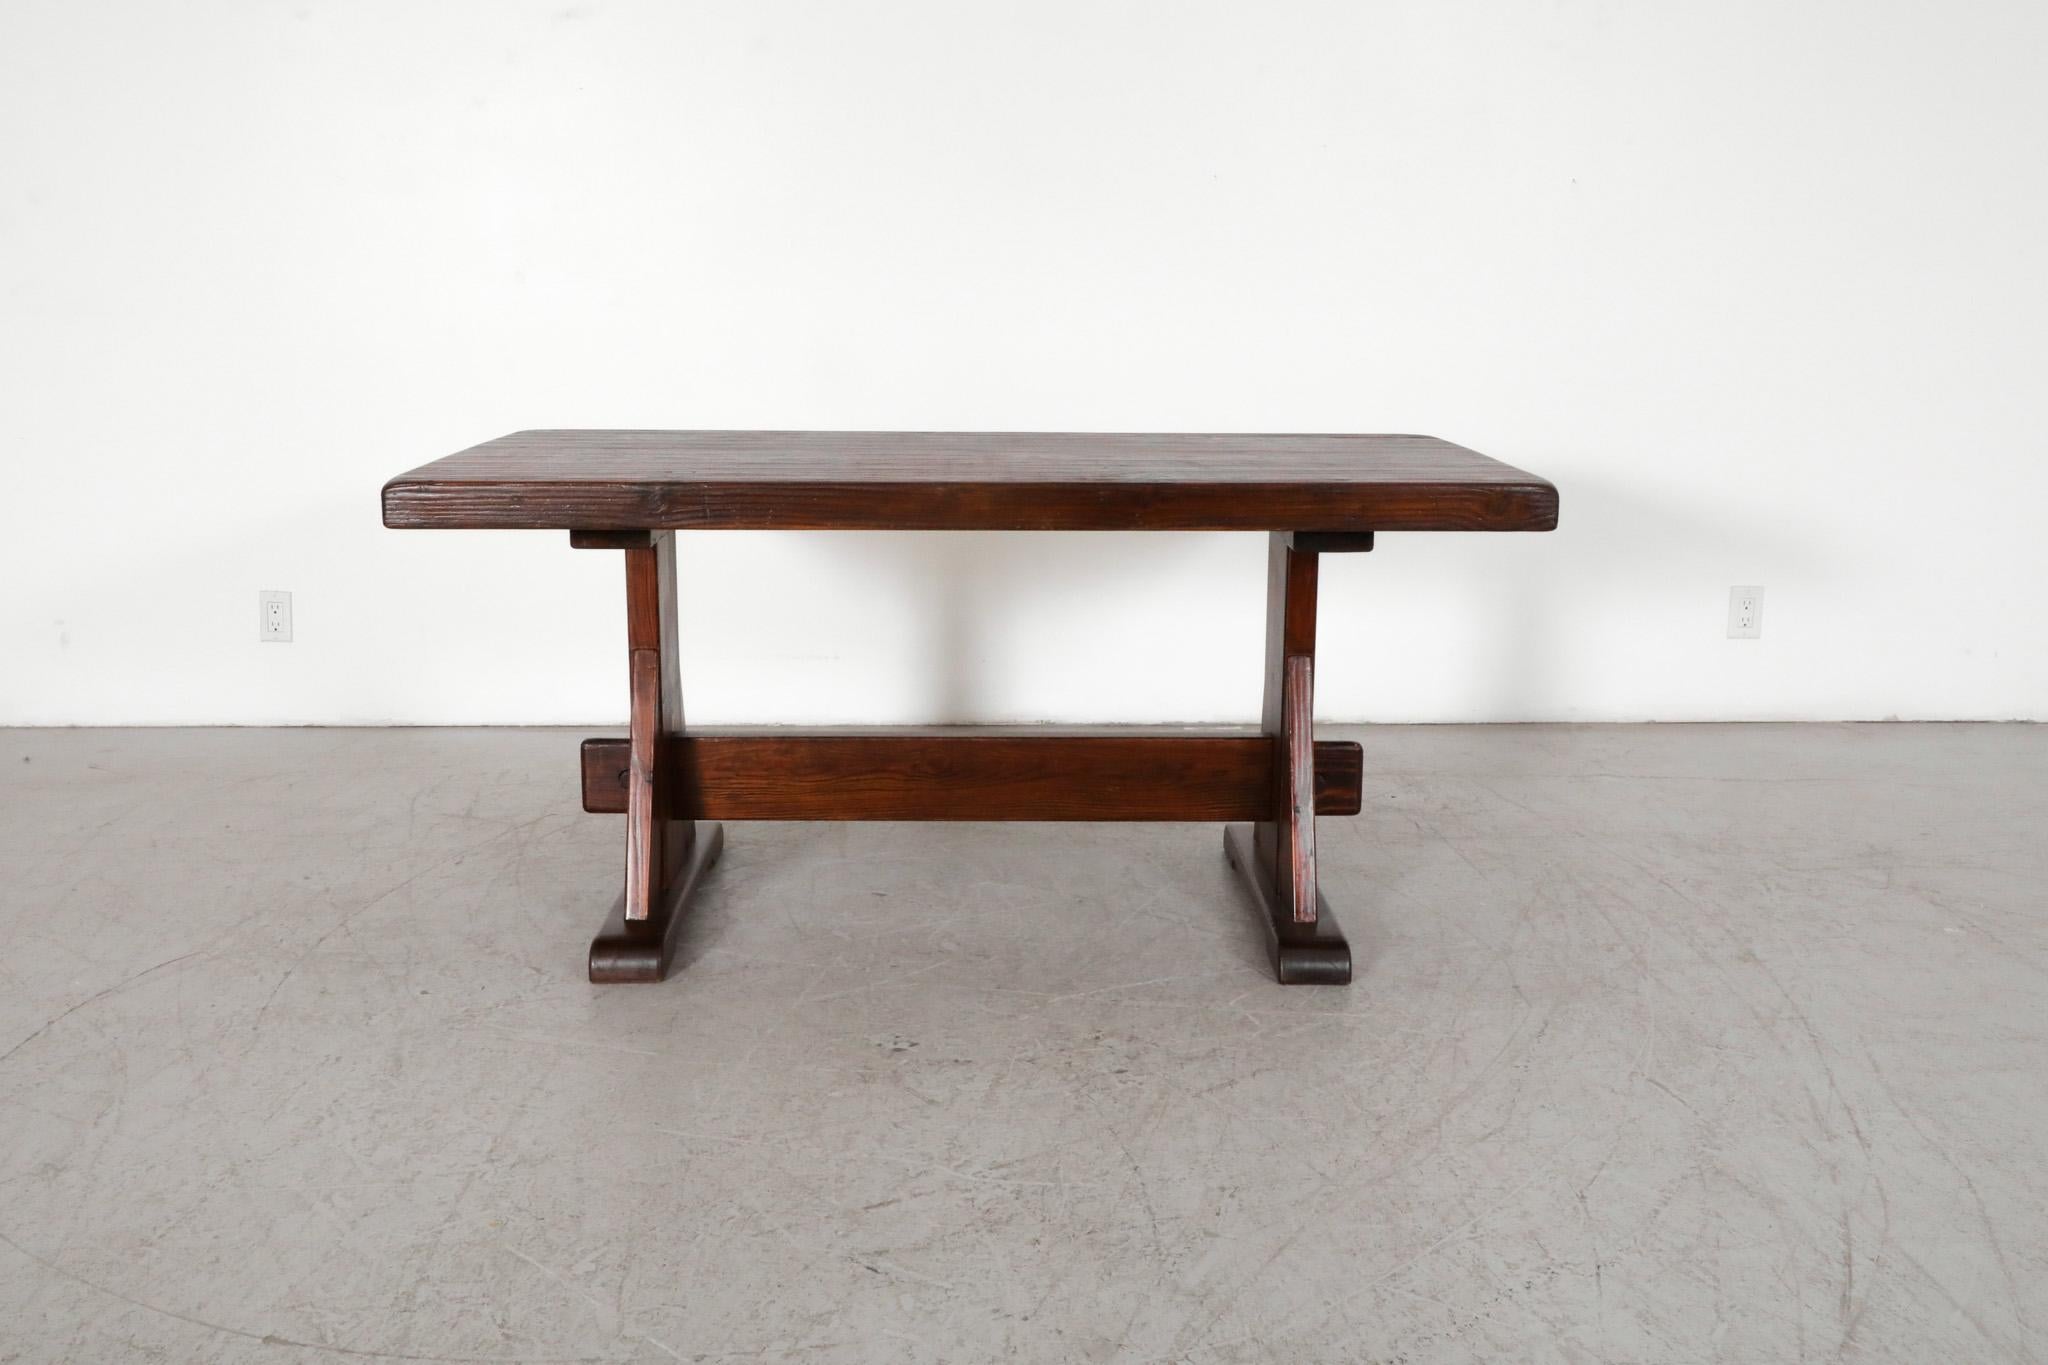 Mid-Century, Belgian manufacturer De Puydt attributed, stunning brutalist dining table or desk with trestle base. Beautiful, solid dark oak with strikingly heavy textural grain. In original condition with some visible wear consistent with its age